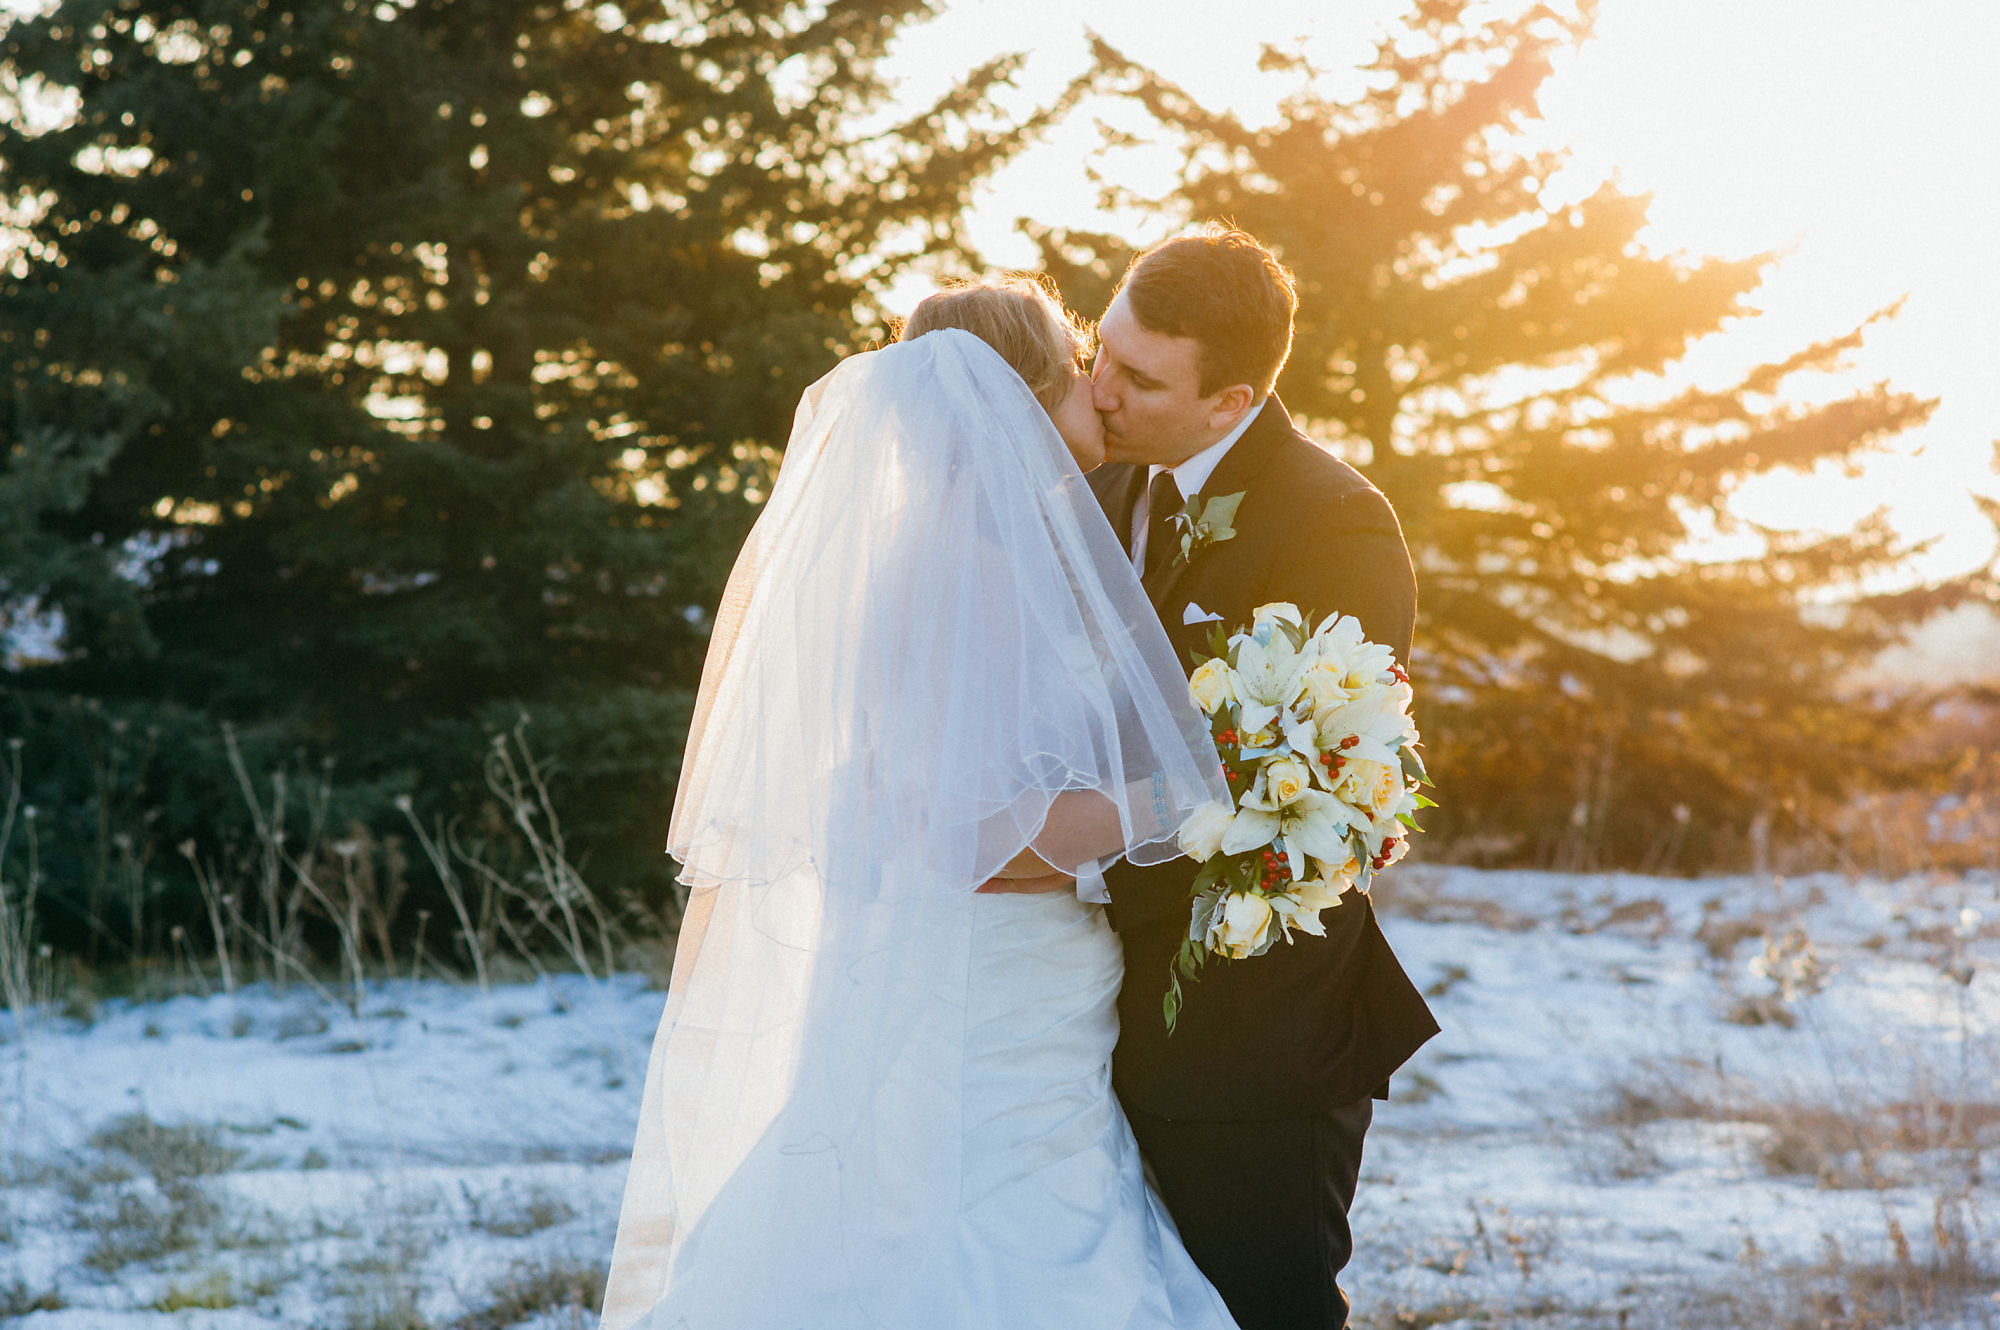 Portrait of the bride and groom kissing at sunset at Lesalle Park during their wedding shot with Burlington Wedding Photographer Jennifer Blaak.